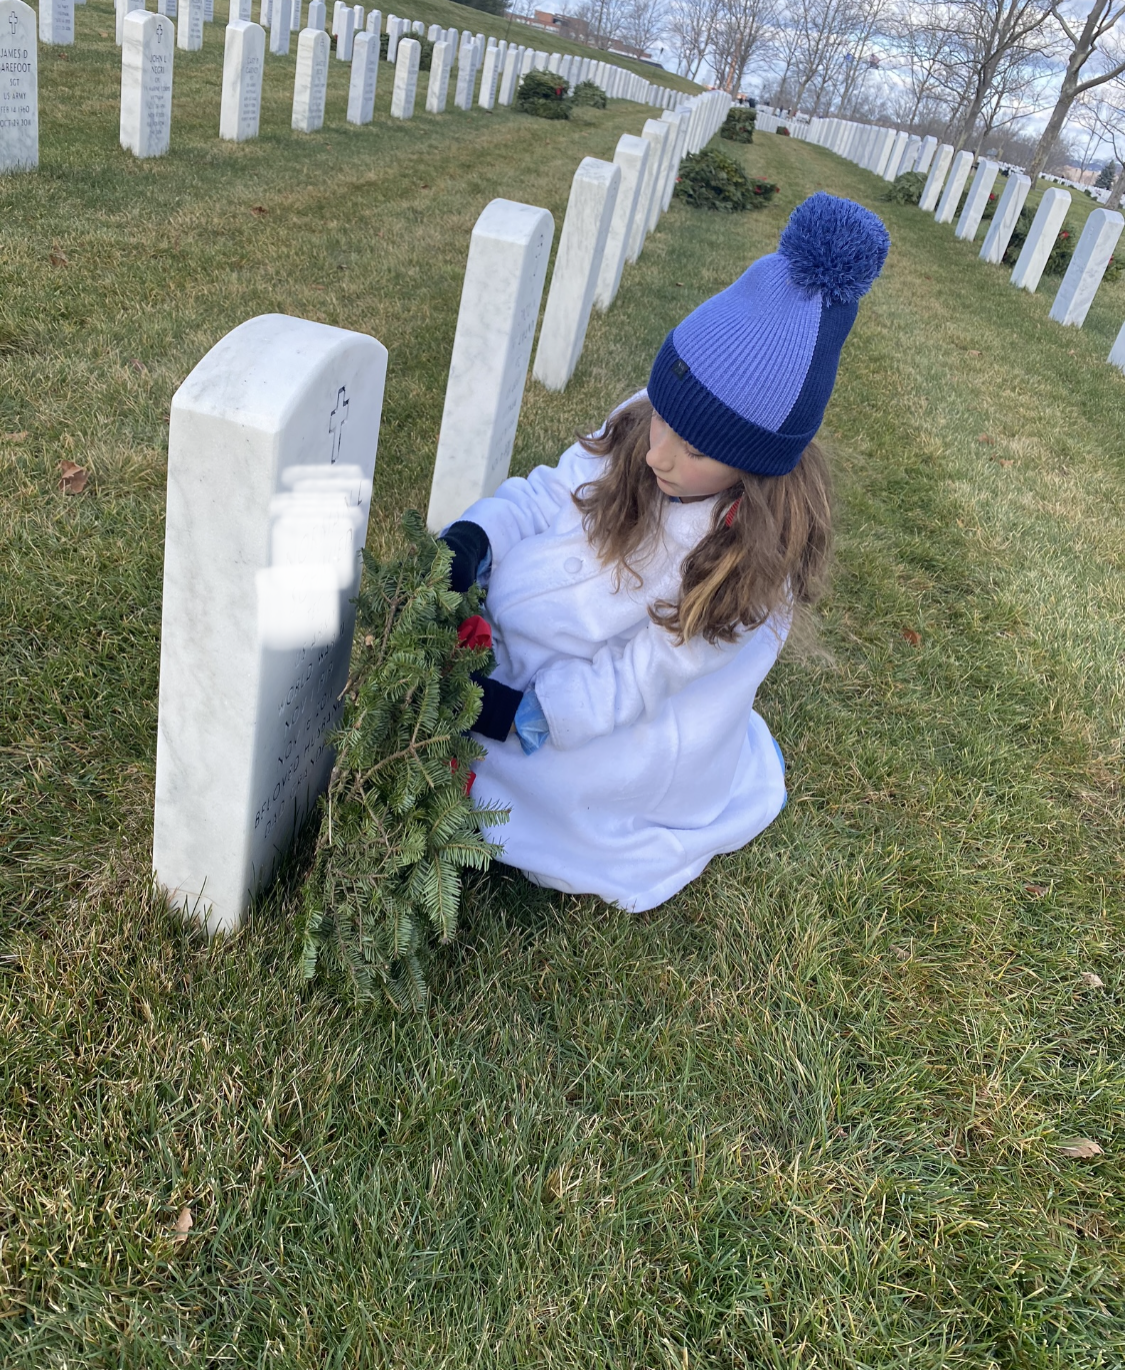 Wholesale American Flags For Wreaths Across America